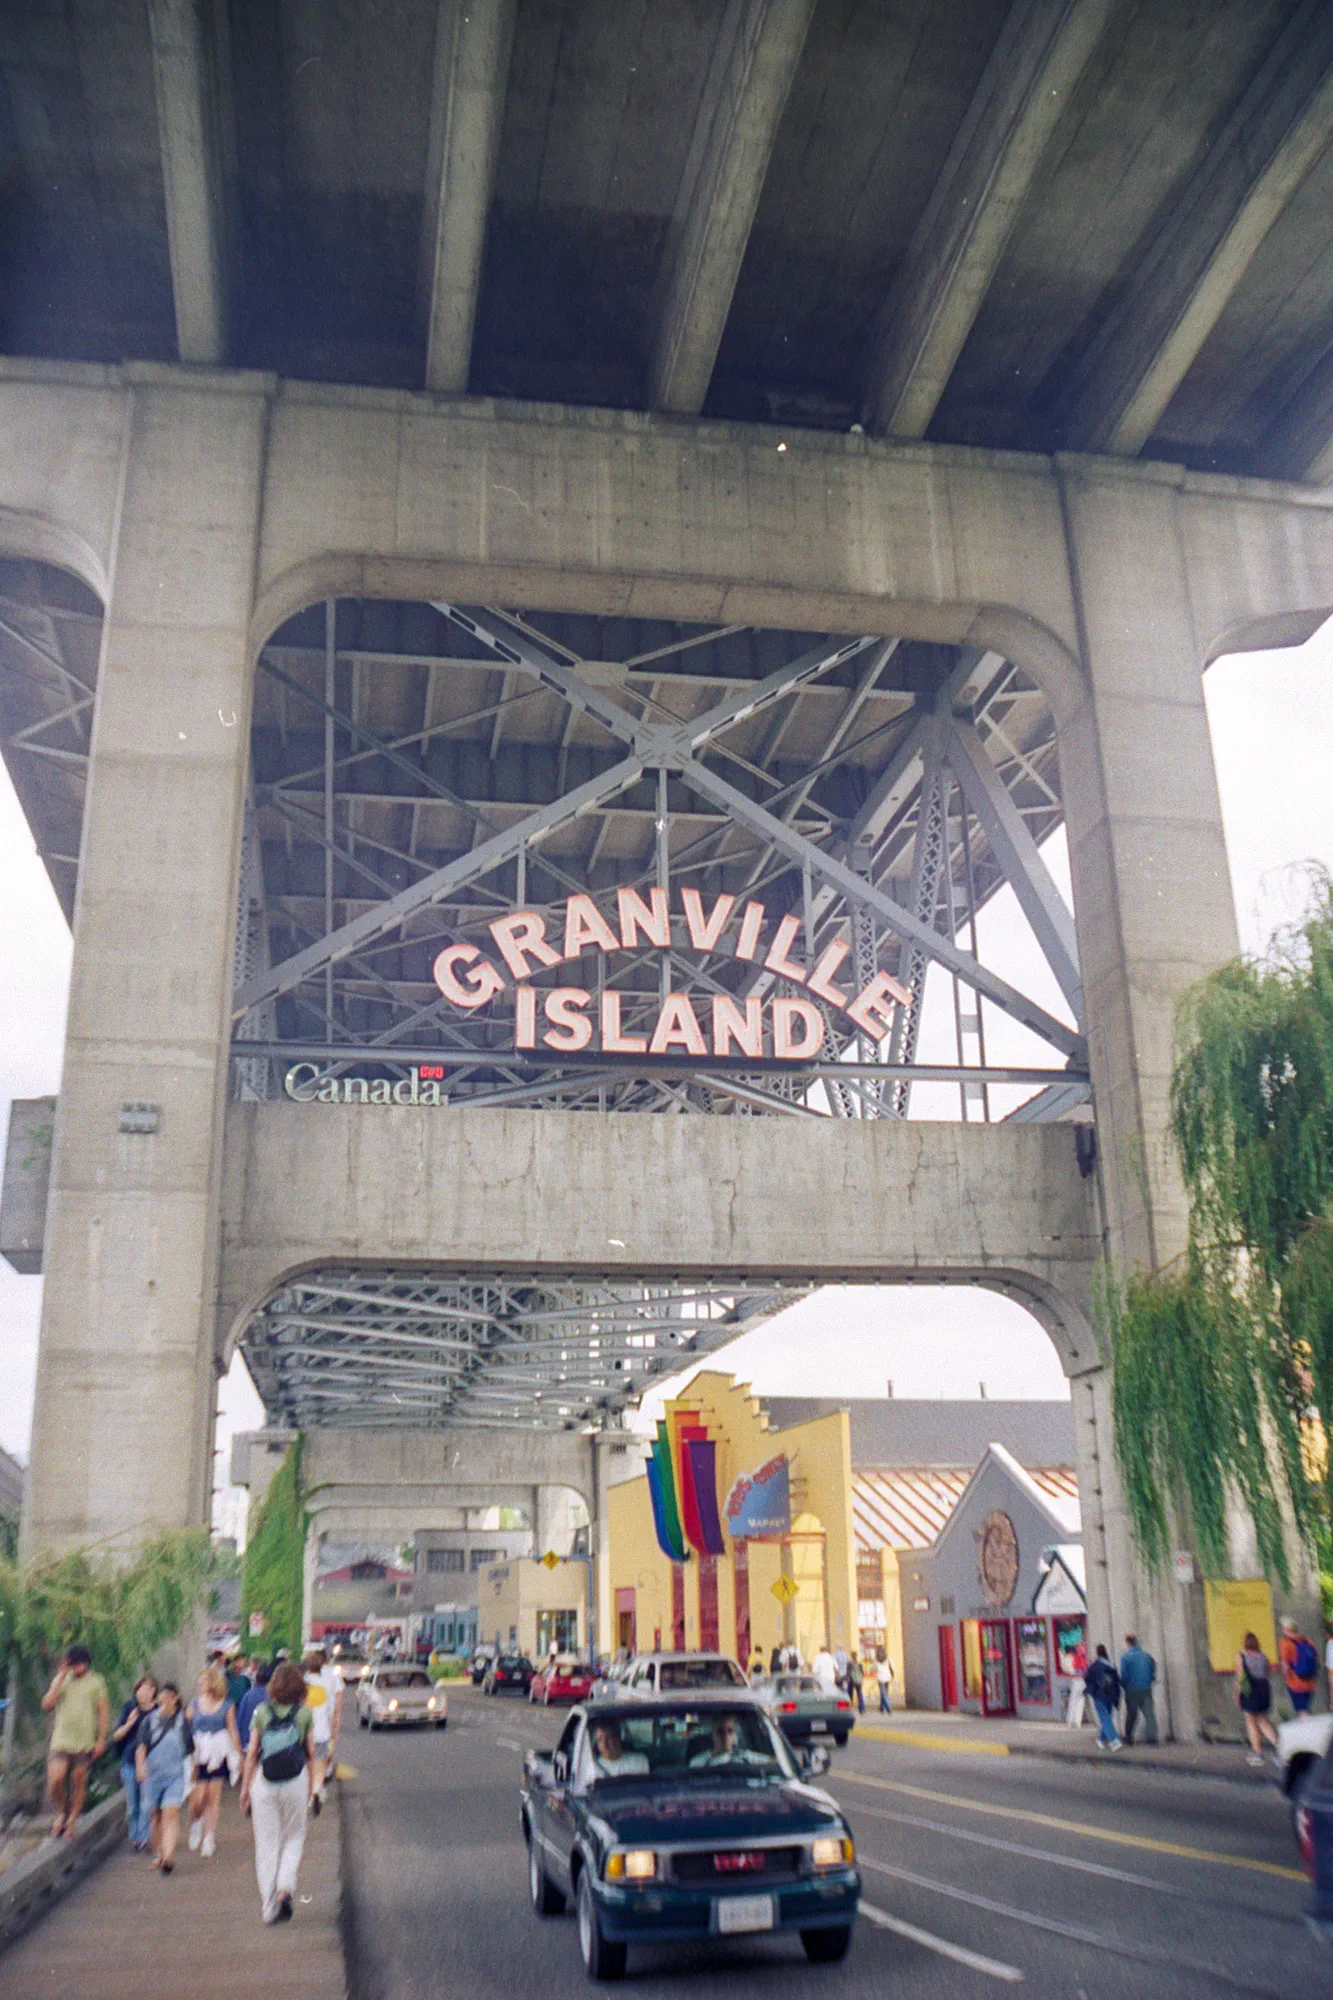 Welcome to Granvile Island